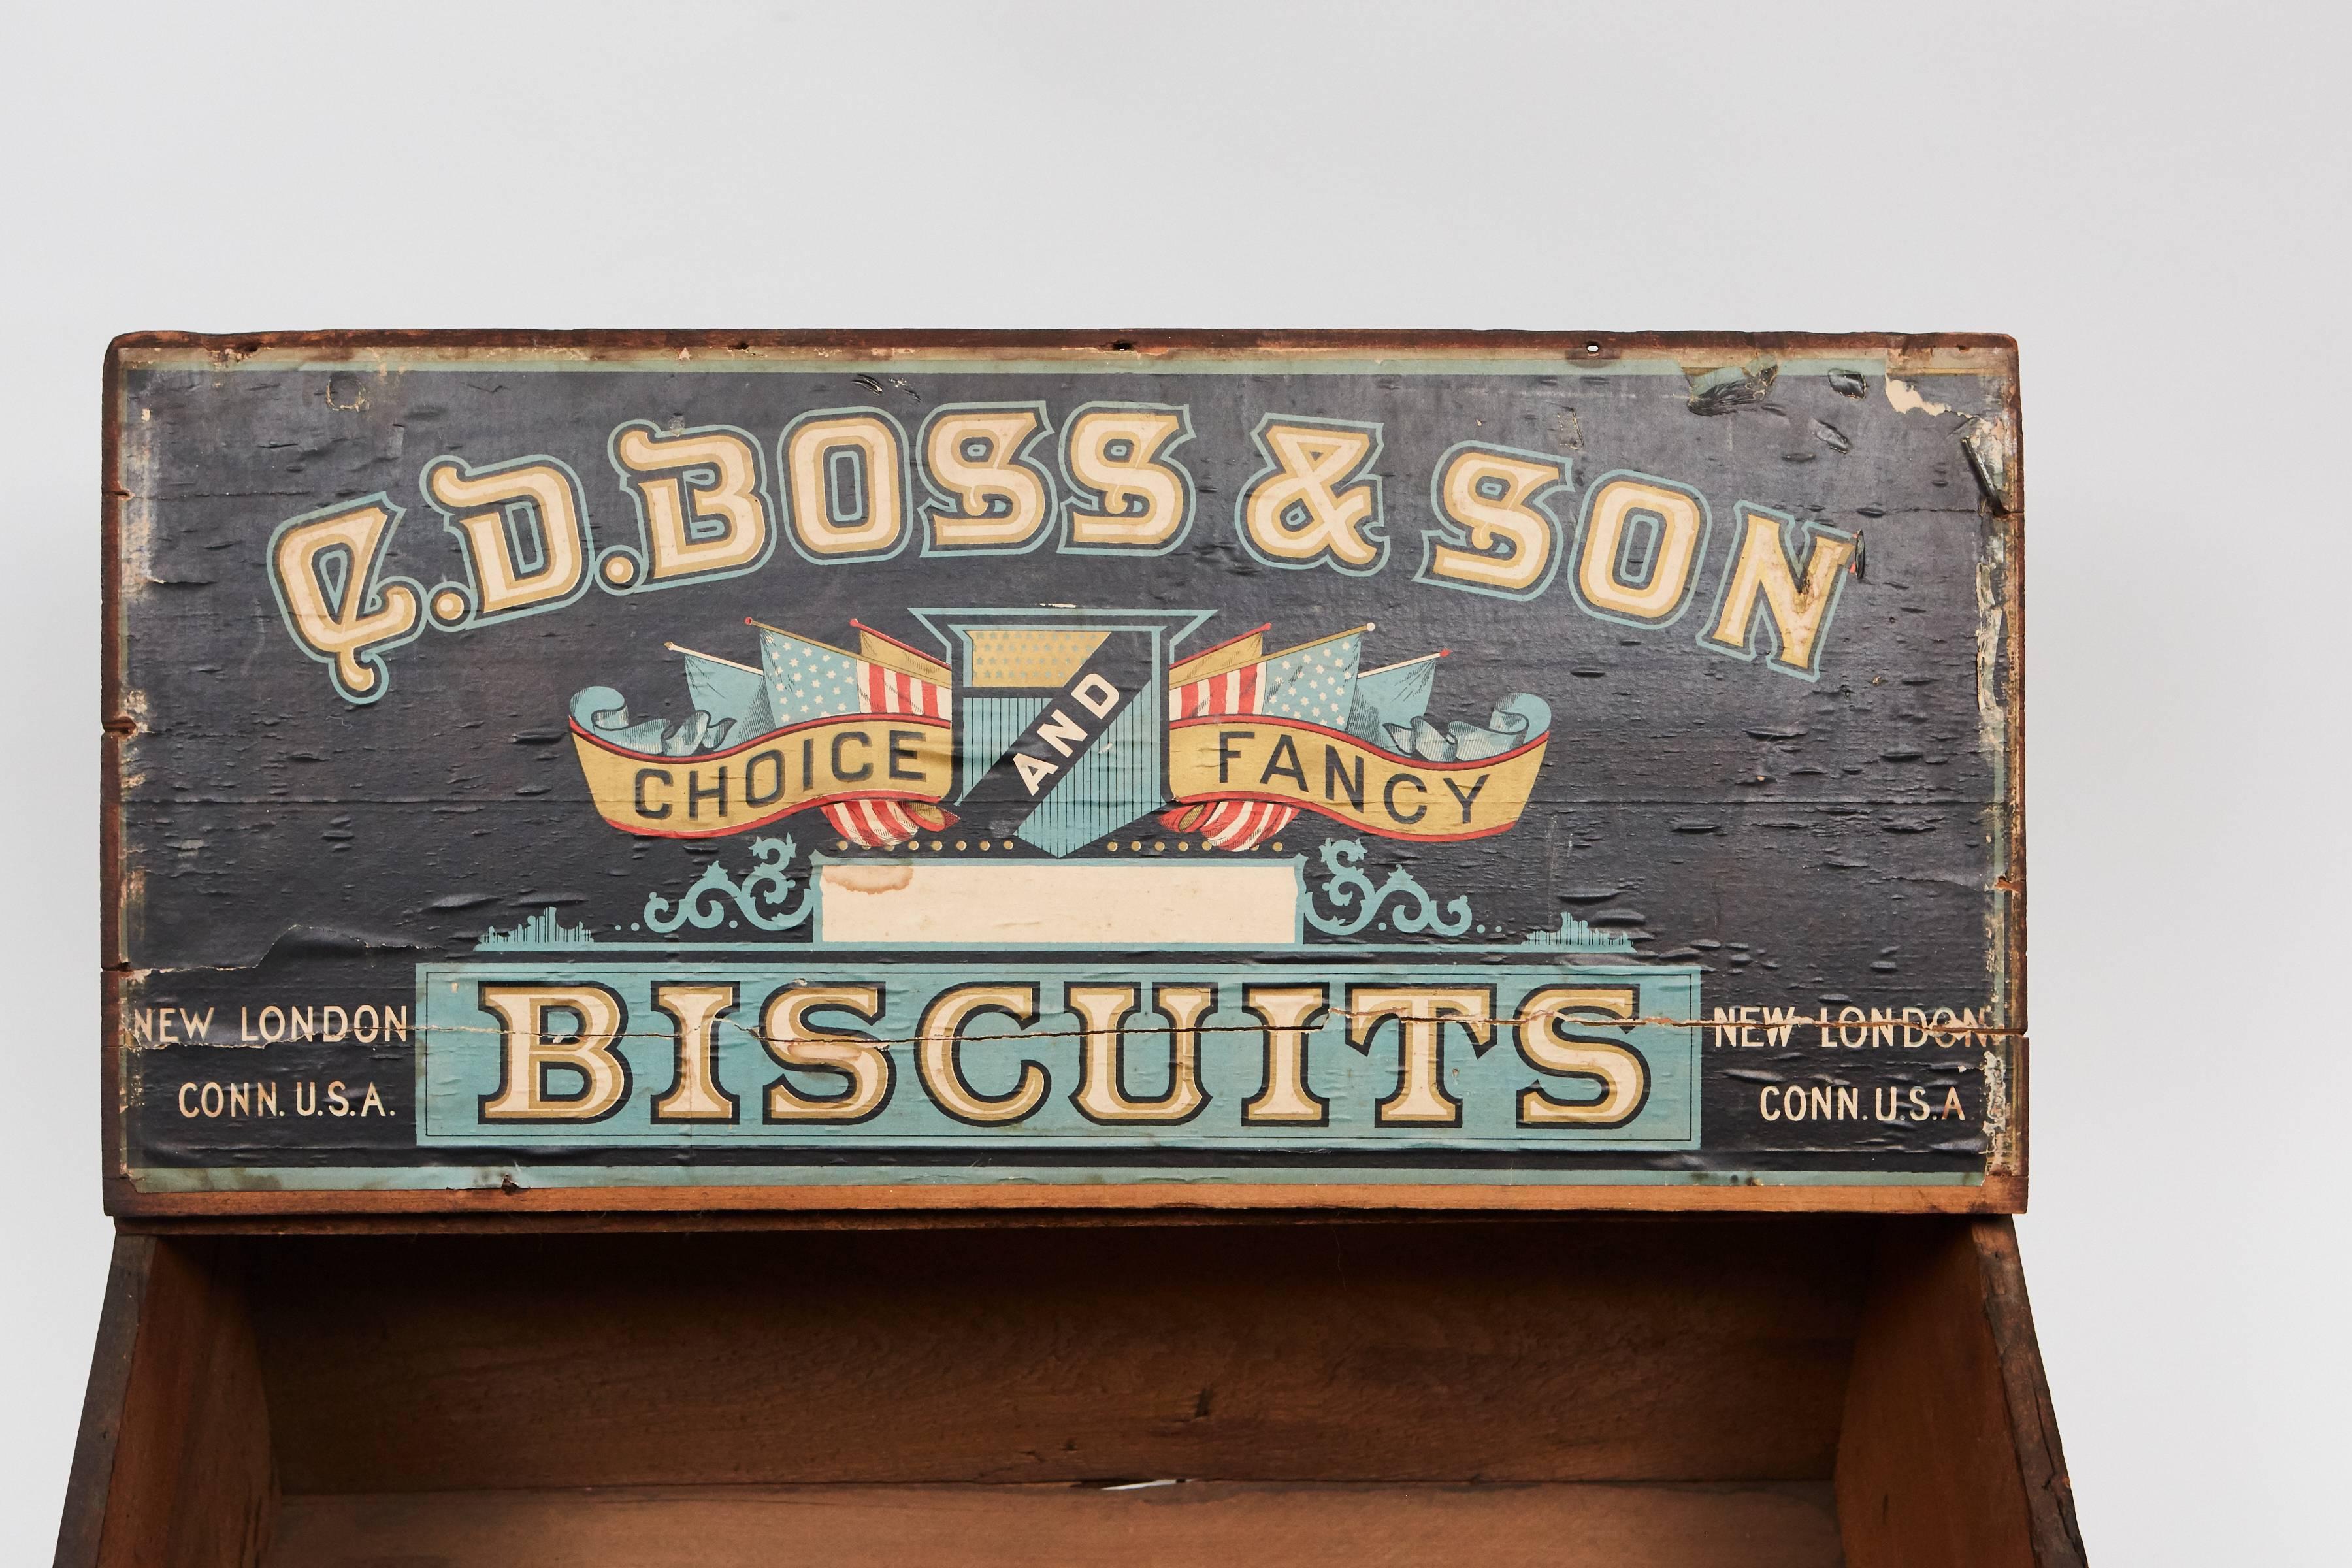 This store display Biscuit Box has great character and charm. The paper printed labels are both in good condition with very little fading or losses, and the label on the inside of the lid retains great original color. The labels read: "C.D.